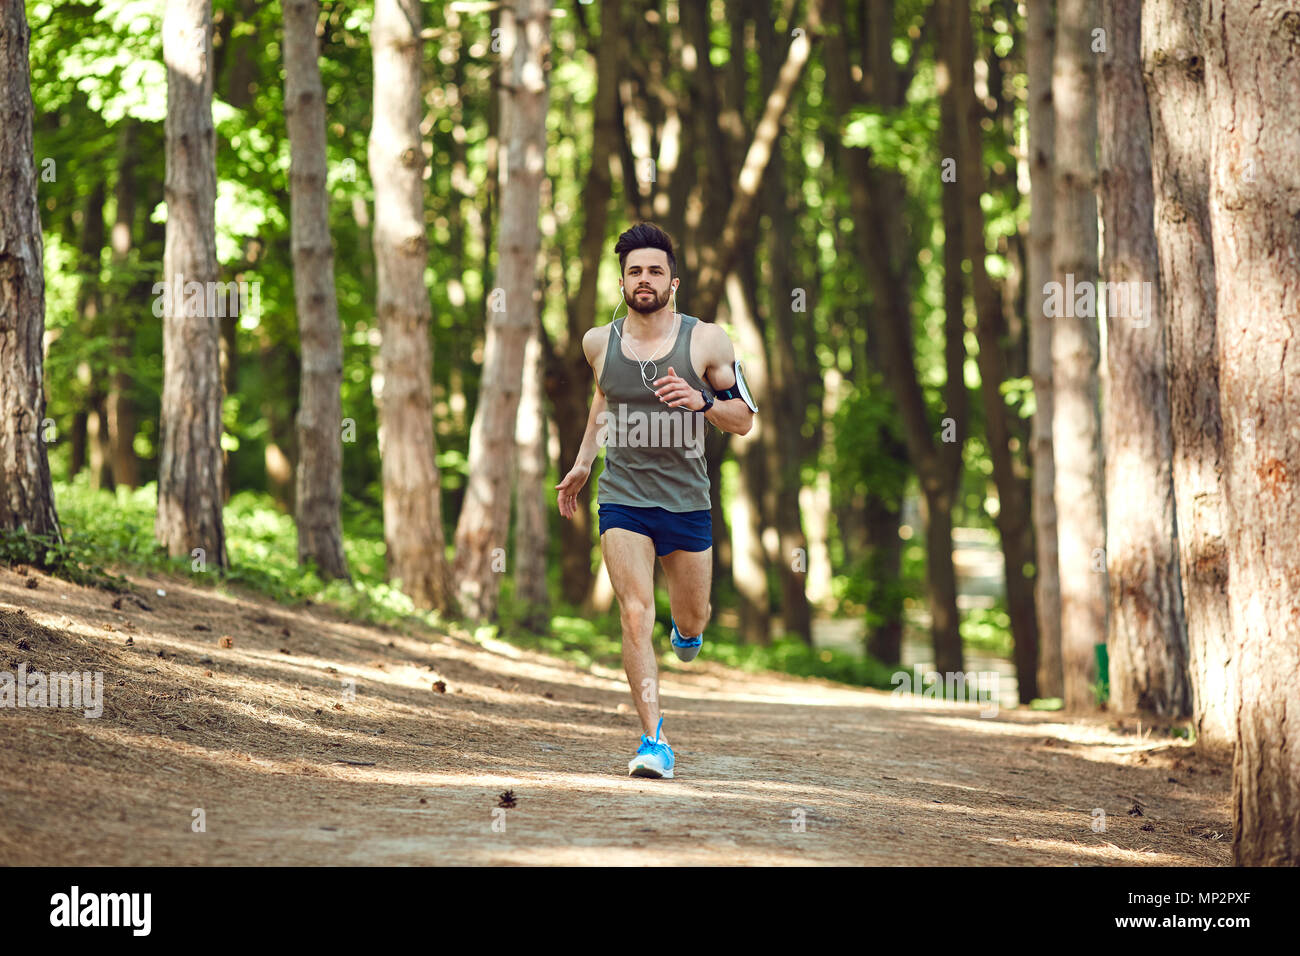 A young male runner runs in the forest. Stock Photo